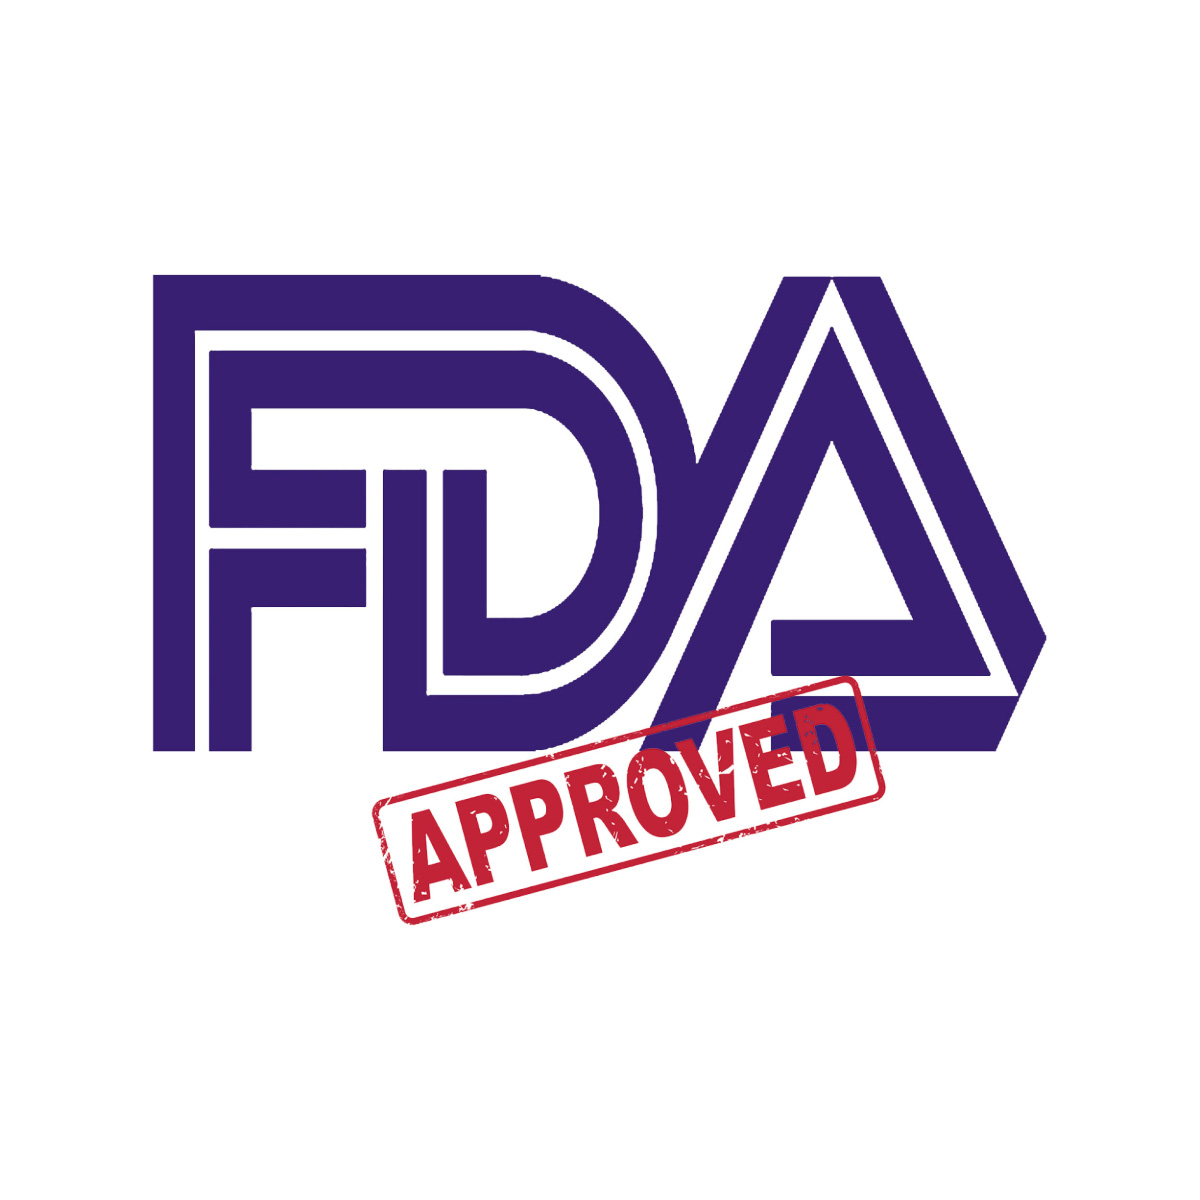 FDA Approves Rigel's REZLIDHIA™ (olutasidenib) for the Treatment of Adult Patients with Relapsed or Refractory Acute Myeloid Leukemia with a Susceptible IDH1 Mutation